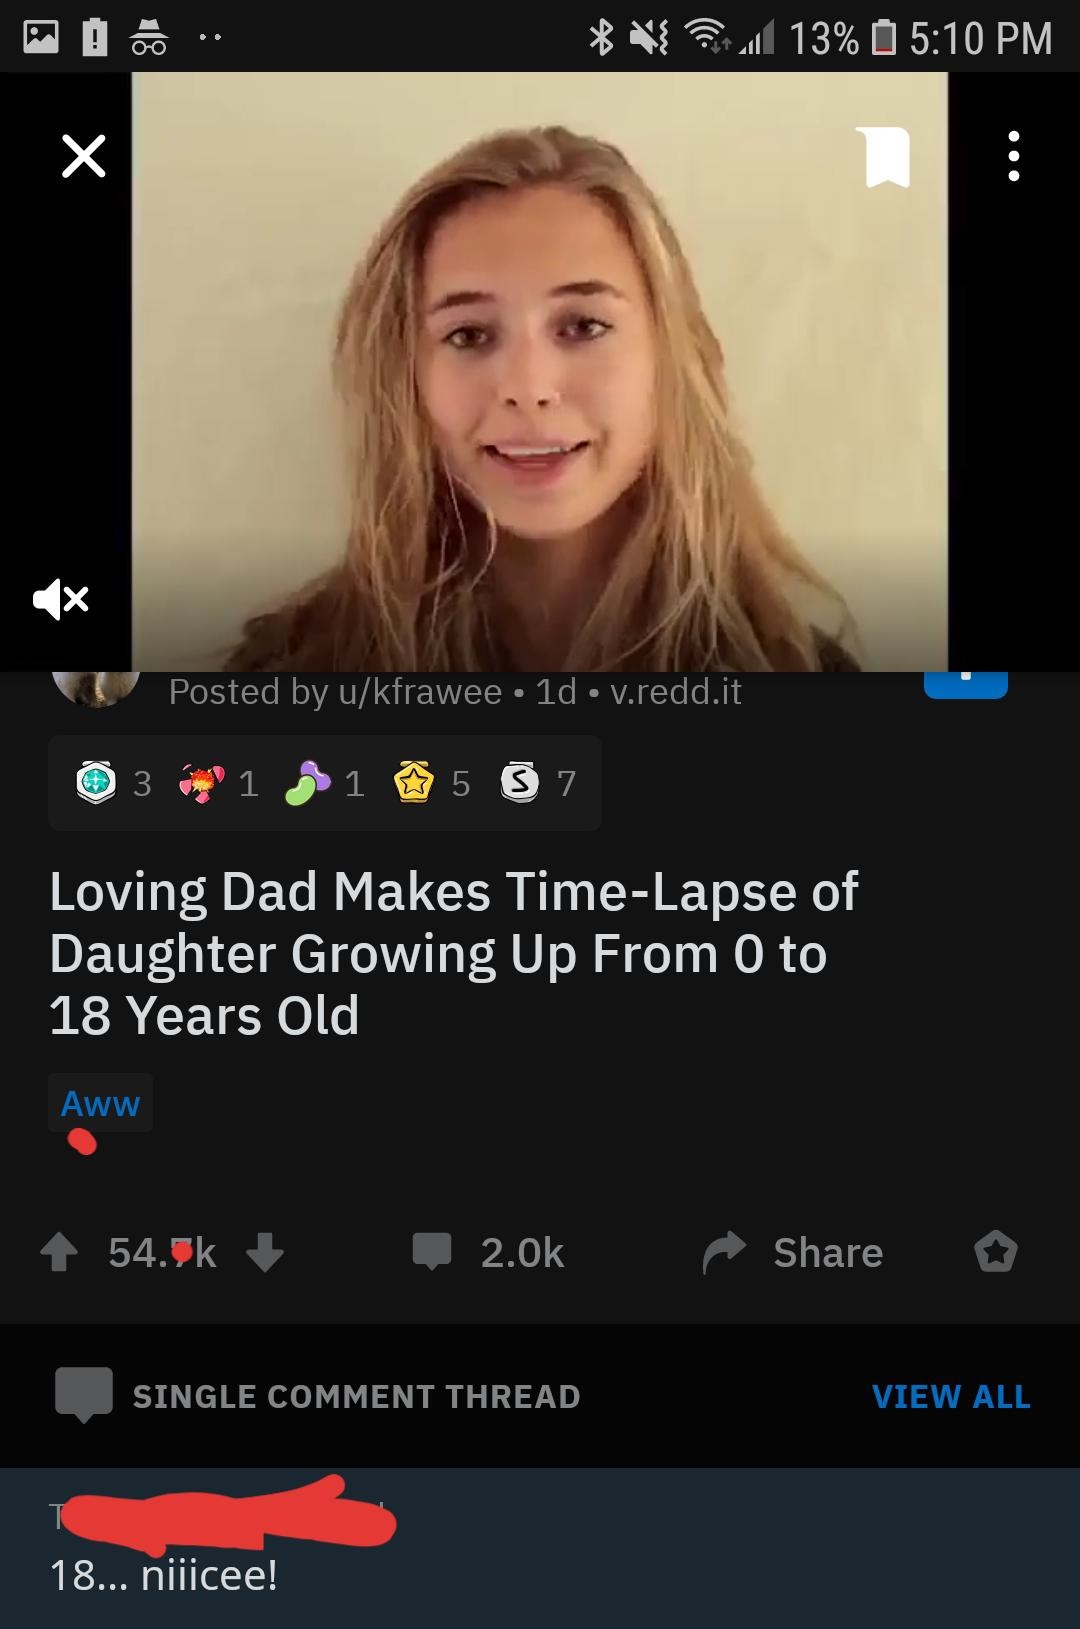 screenshot - 13% Posted by ukfrawee 1d V.redd.it 3 1 0 1 5 7 Loving Dad Makes TimeLapse of Daughter Growing Up From 0 to 18 Years Old Aww o Single Comment Thread View All 18... niiicee!